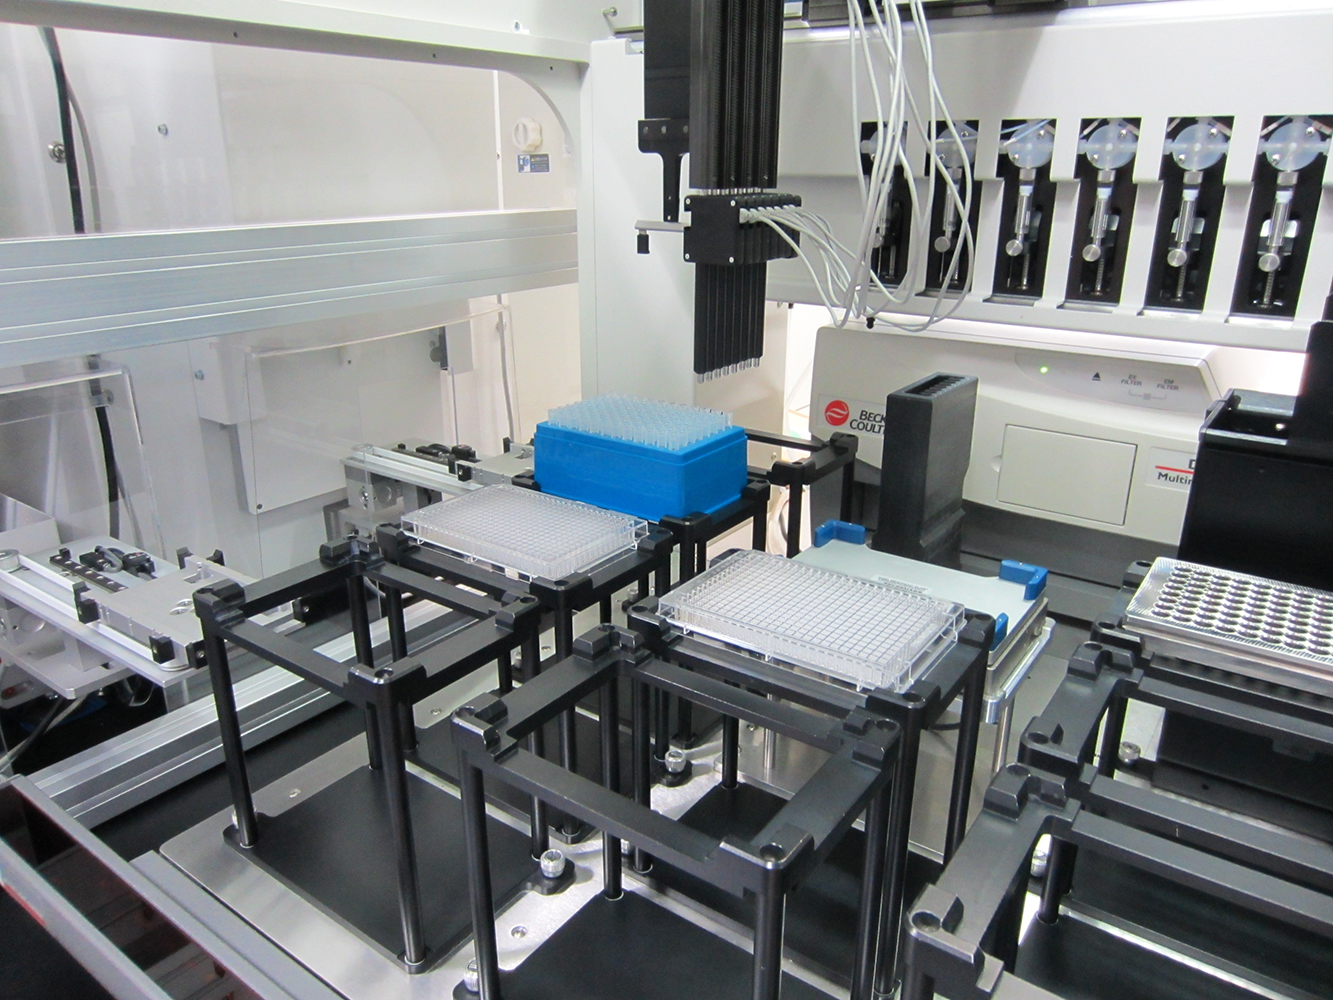 In a lab, a robot arm hangs from the ceiling while multiple trays for the experiment have been positioned below.